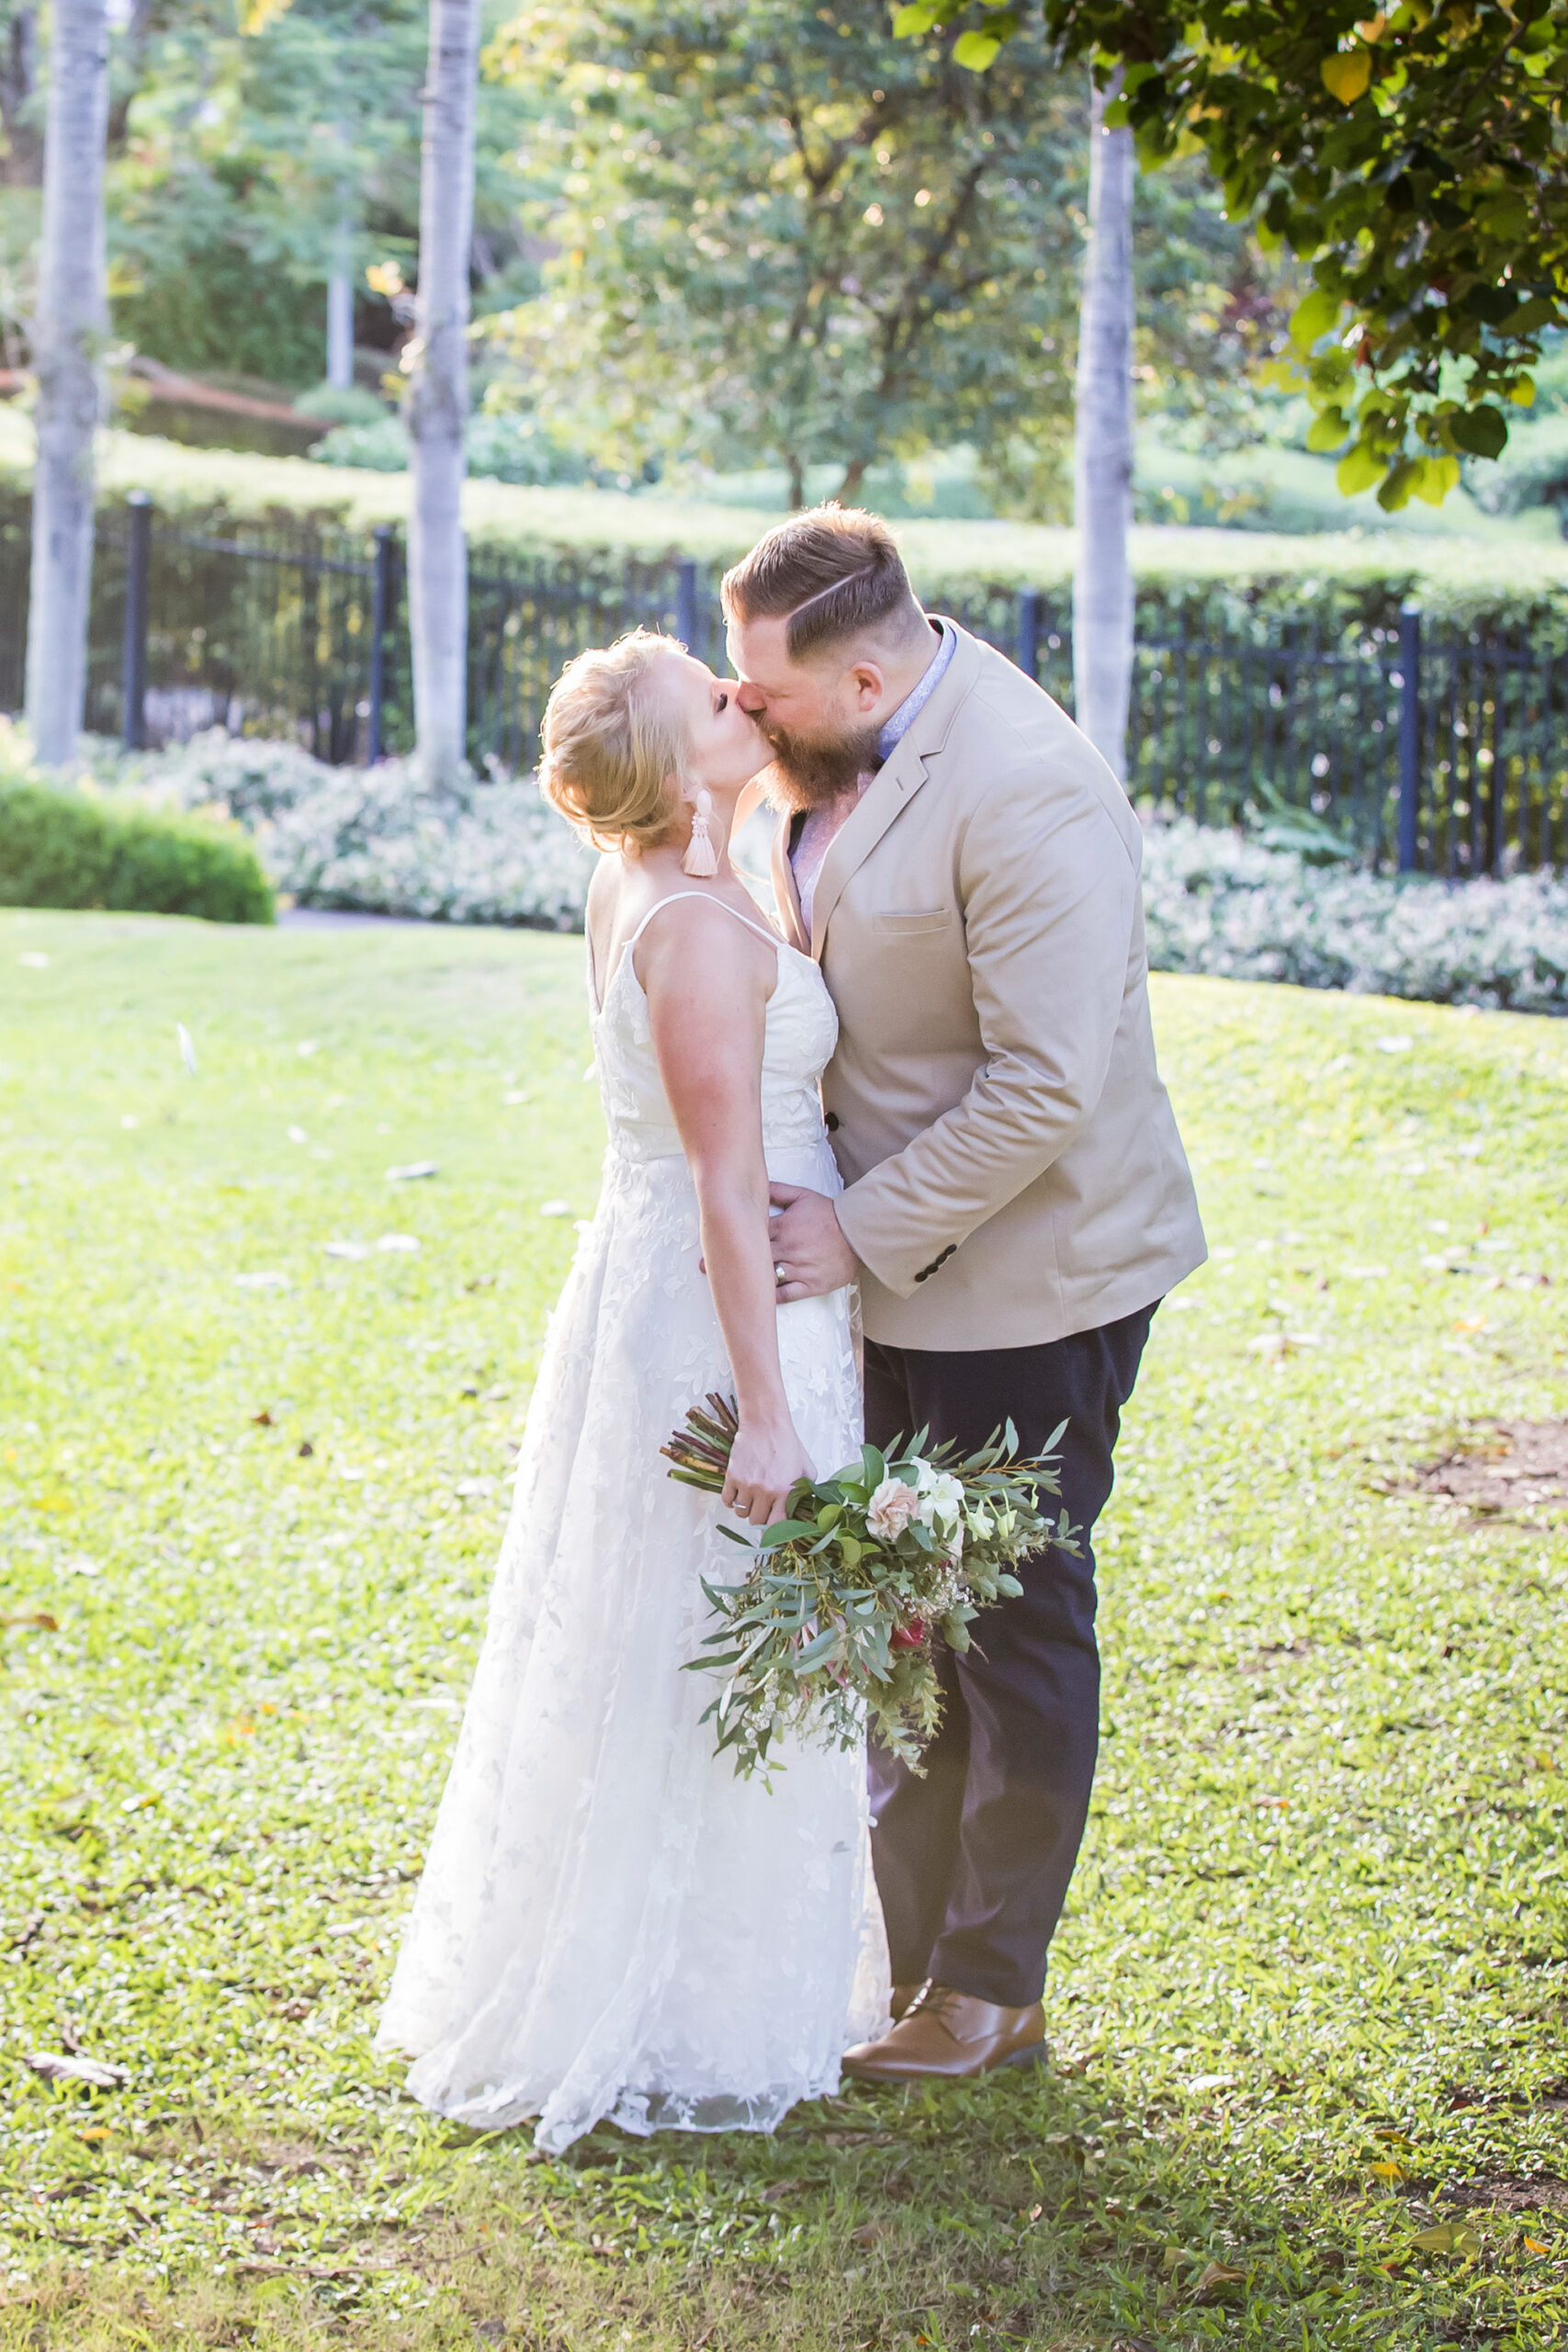 Kelly Keith Elegant Rustic Wedding A Thousand Miles Photography SBS 010 scaled